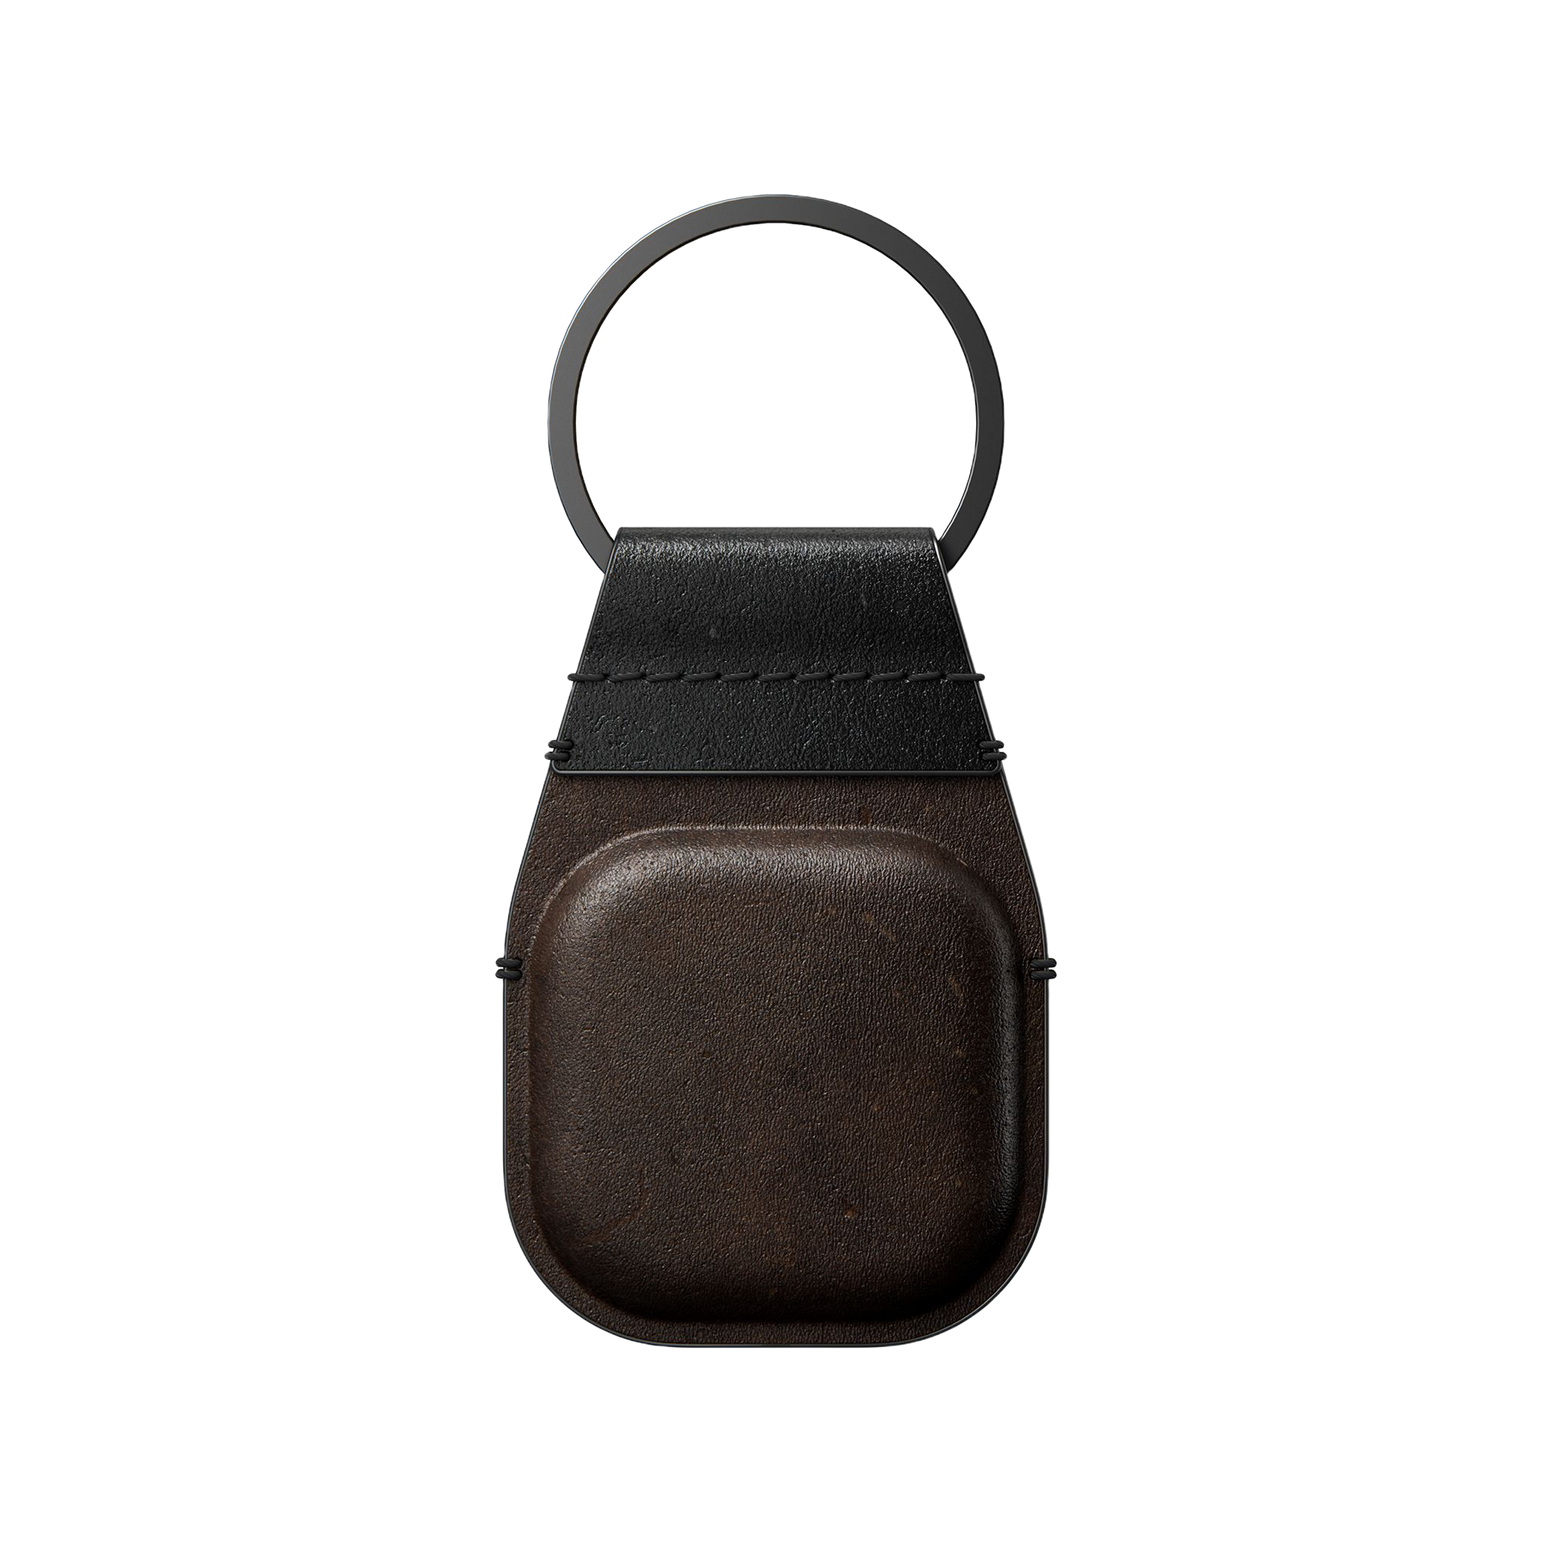 Nomad Leather Keychain for Airtag with Horween Leather - Rustic Brown